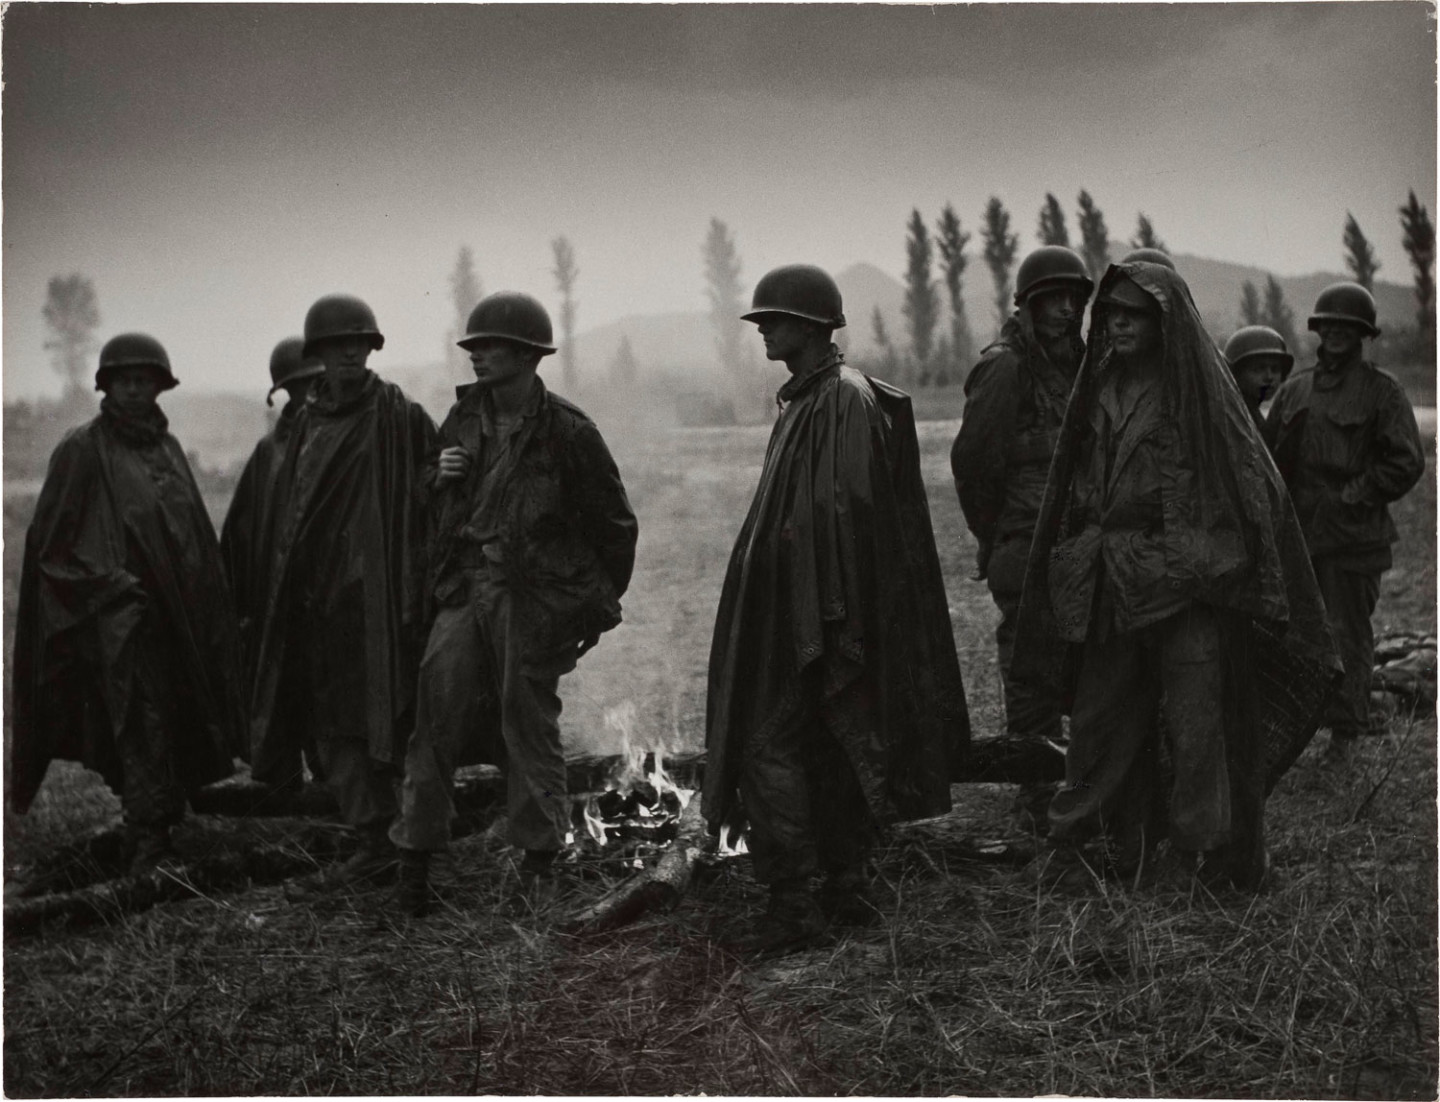 Photograph by Hans Malmberg from the series Korean War